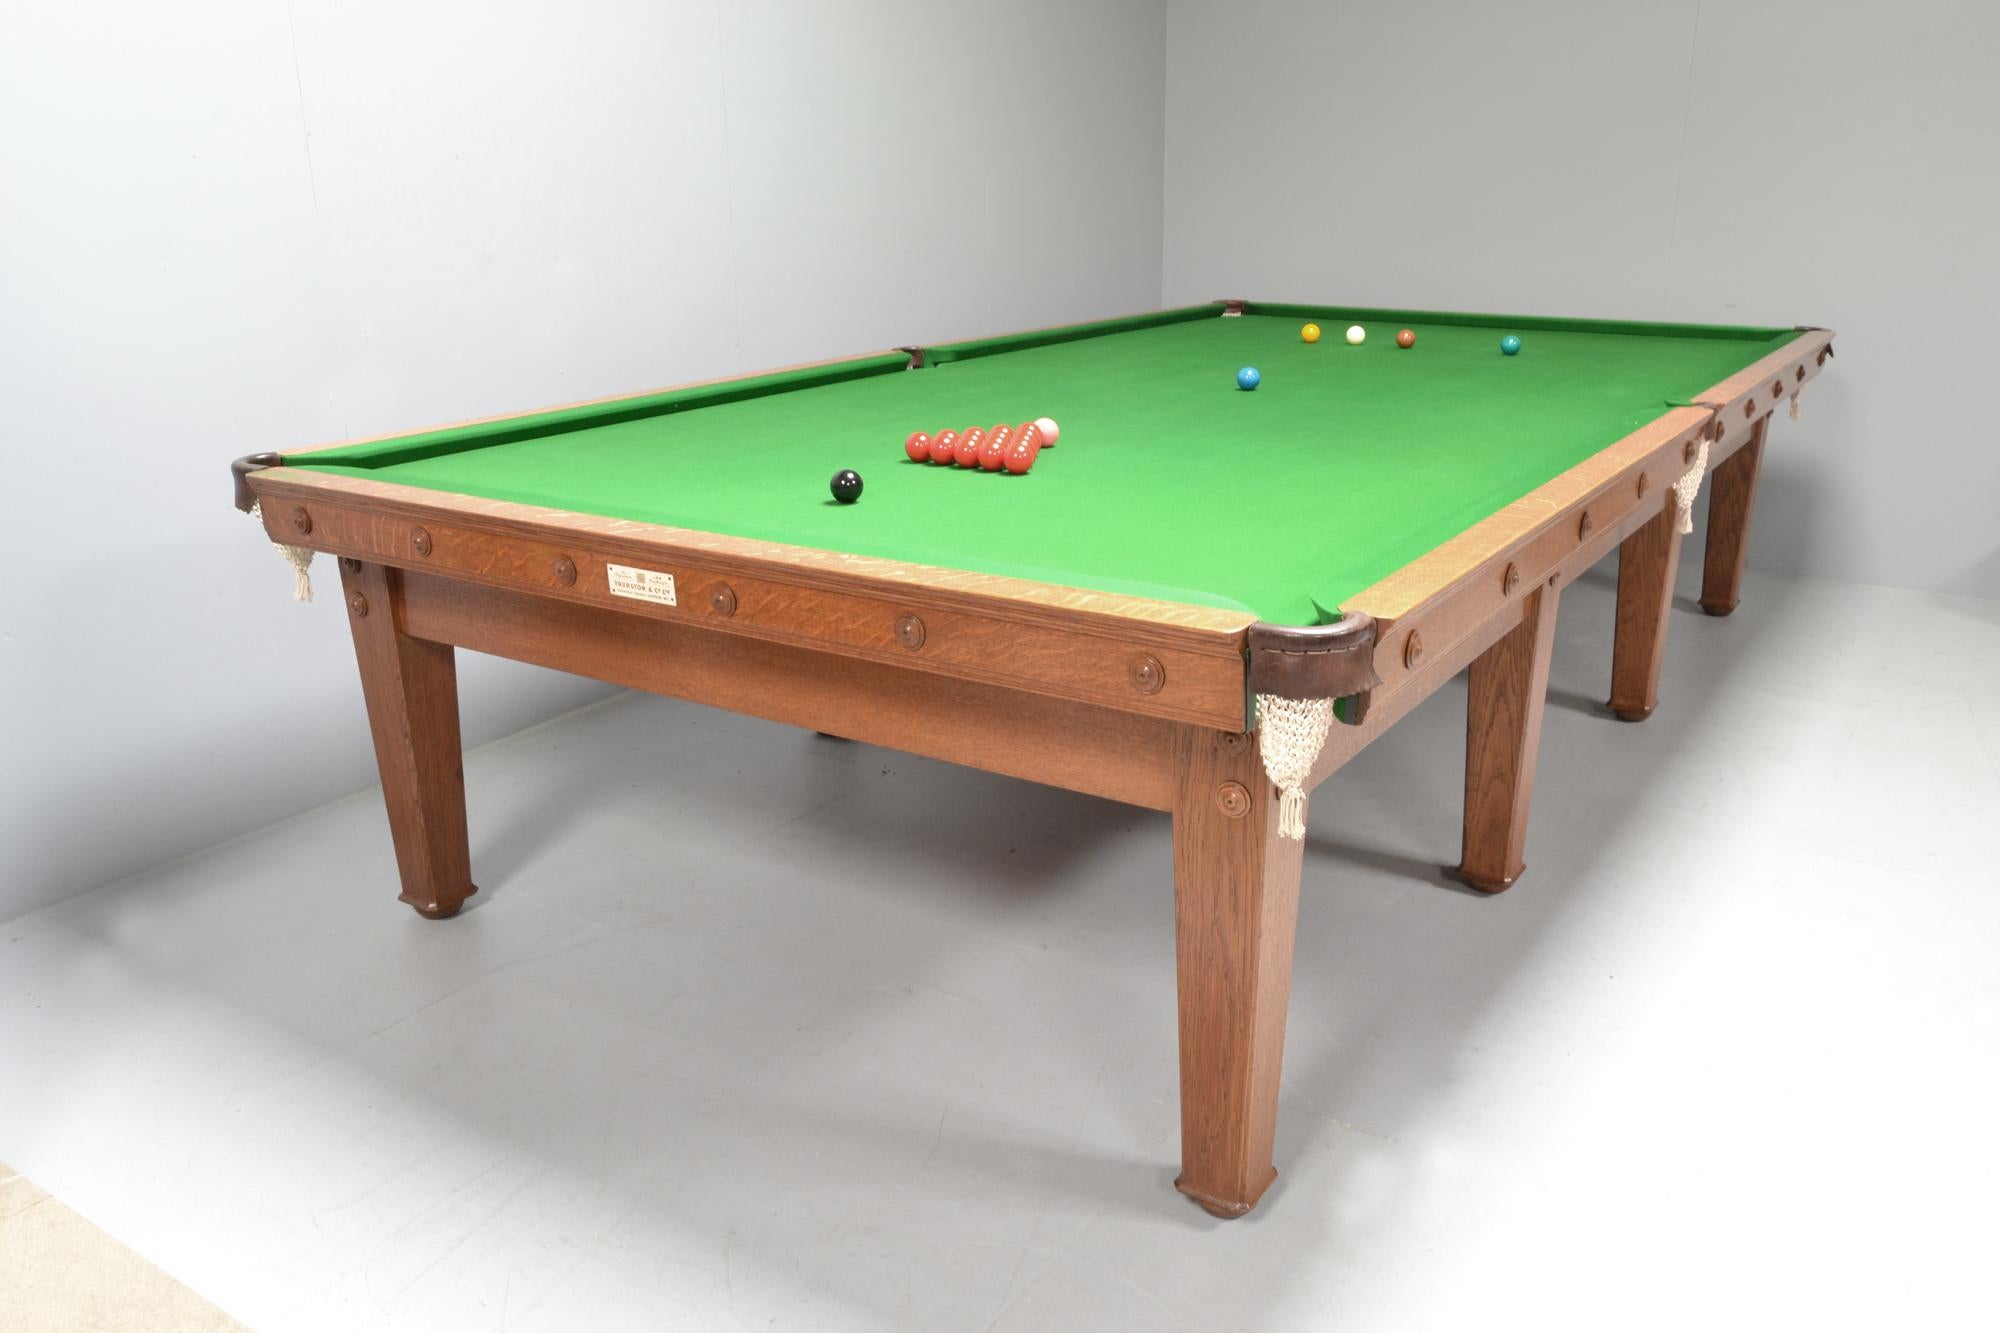 A beautiful full size 12ft x 6ft oak billiard or snooker table circa 1907, designed by C F A Voysey, elegant clean lines with tapering chamfered legs.

The table has been sympathetically cleaned and lightly waxed by hand to ensure an original arts